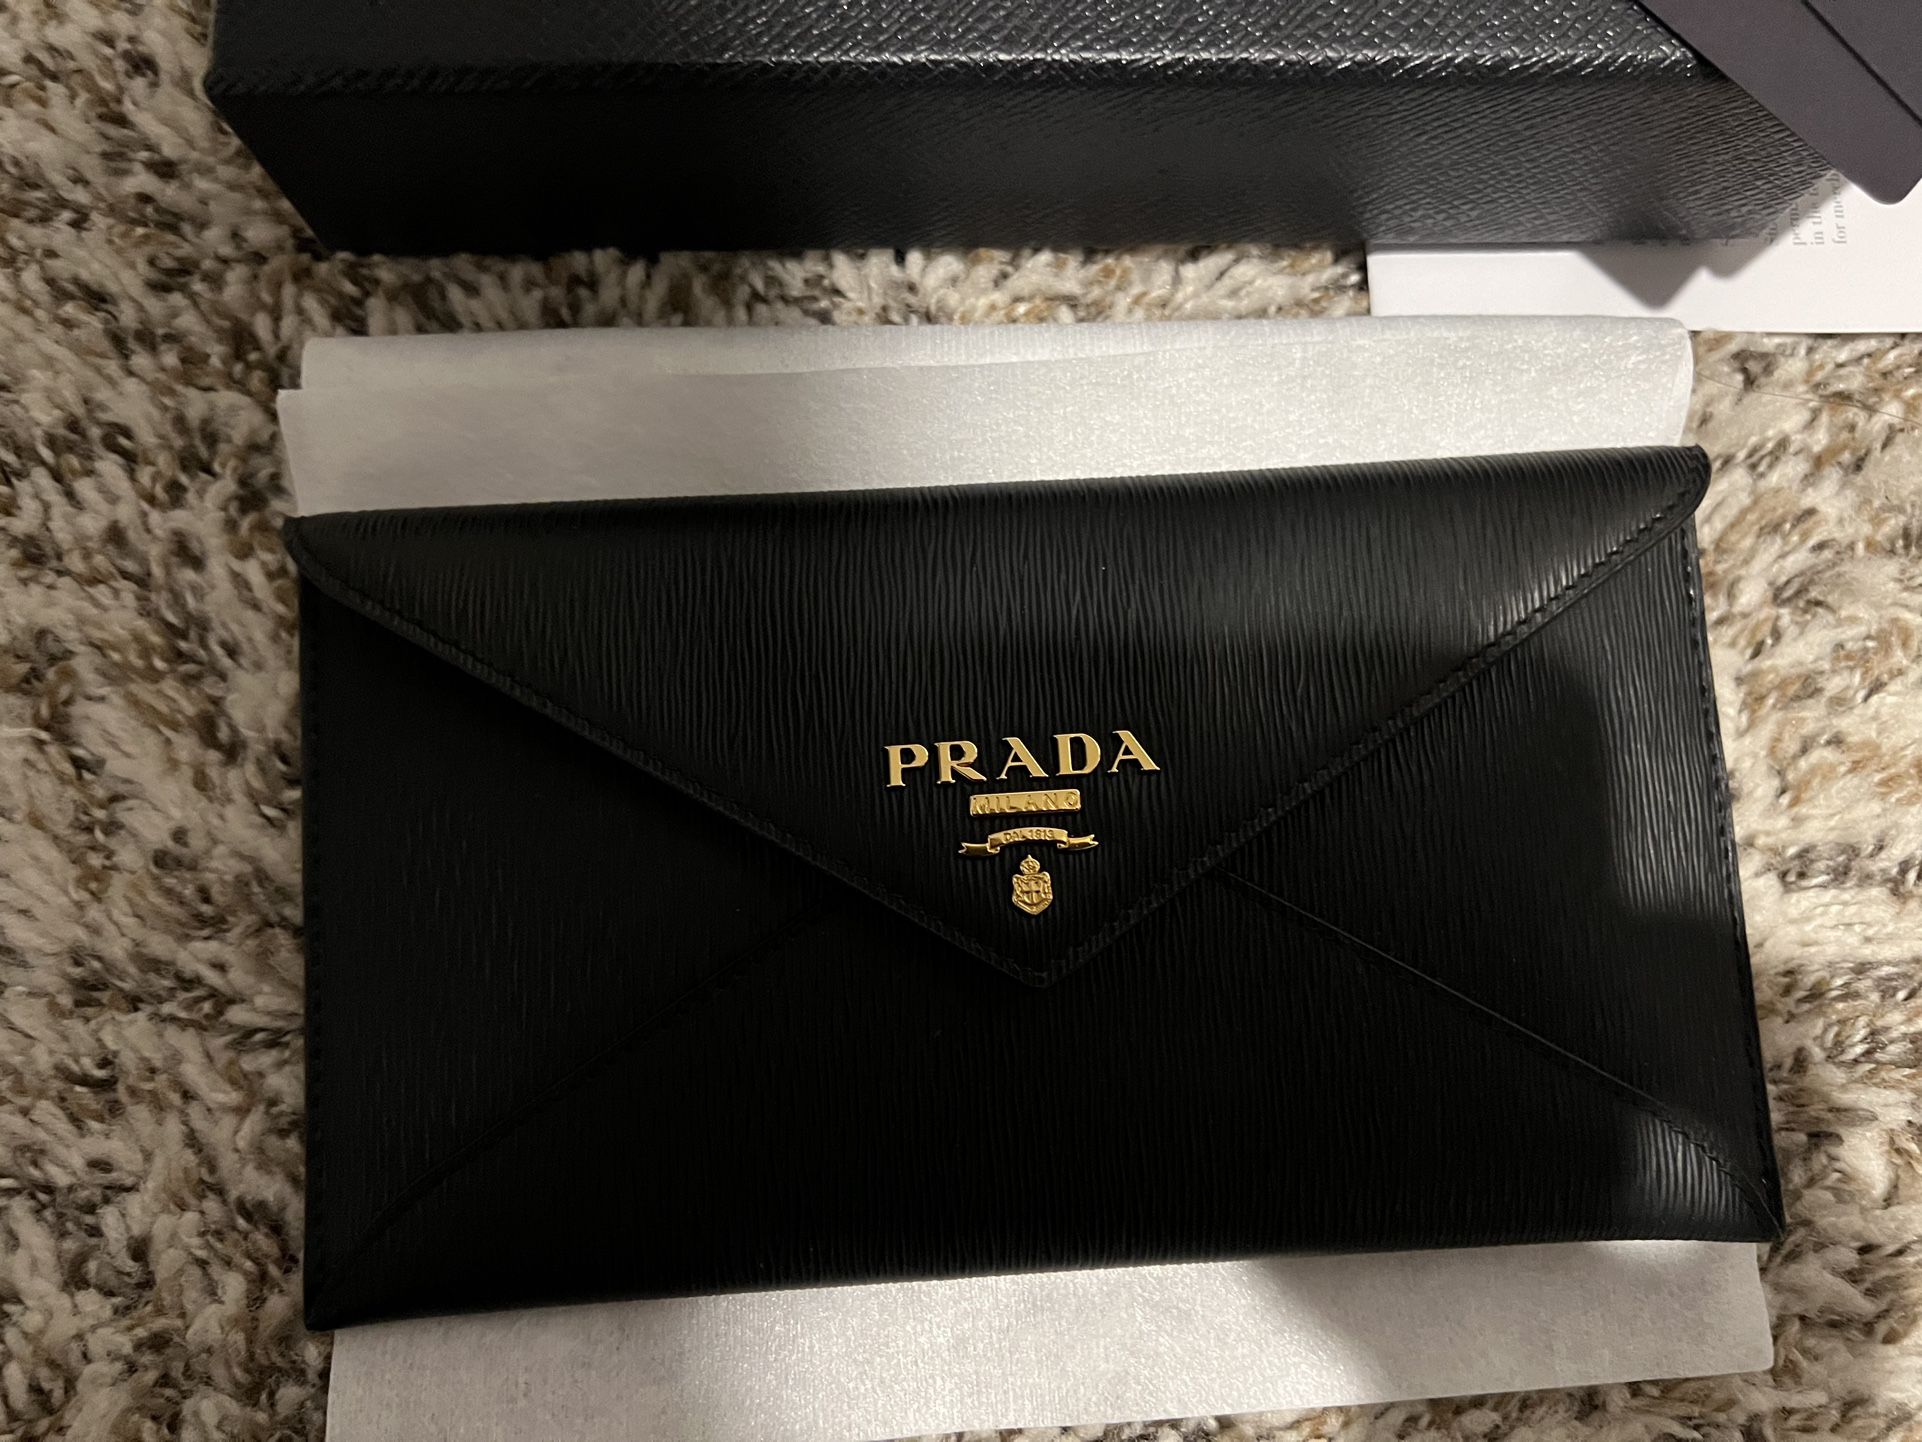 NEW AUTHENTIC PRADA CLUTCH WITH RECEIPT AND ALL PACKAGING 